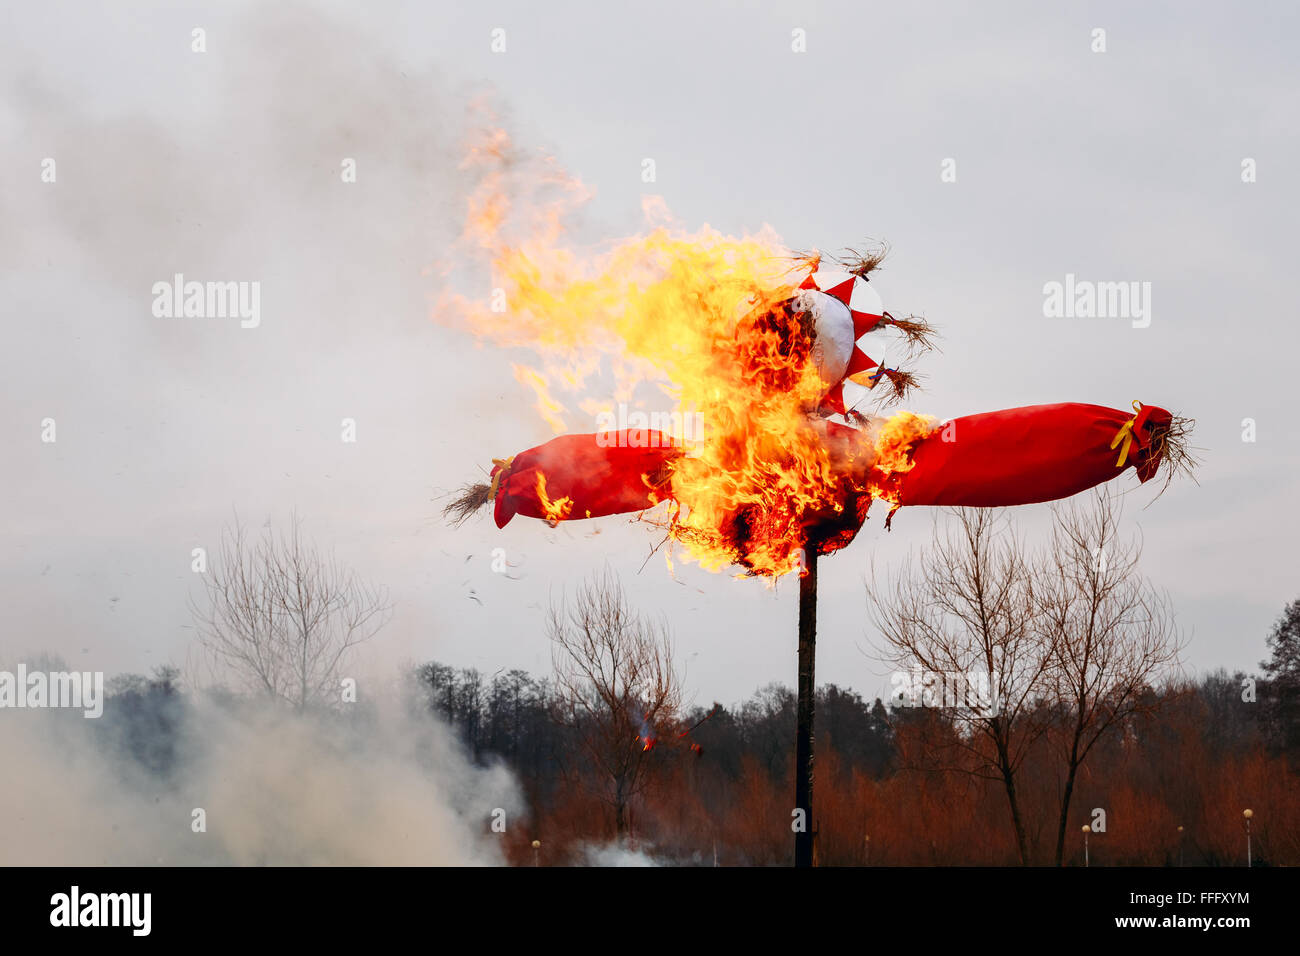 Burning effigies straw Maslenitsa in fire on the traditional holiday dedicated to the approach of spring - Slavic celebration Sh Stock Photo